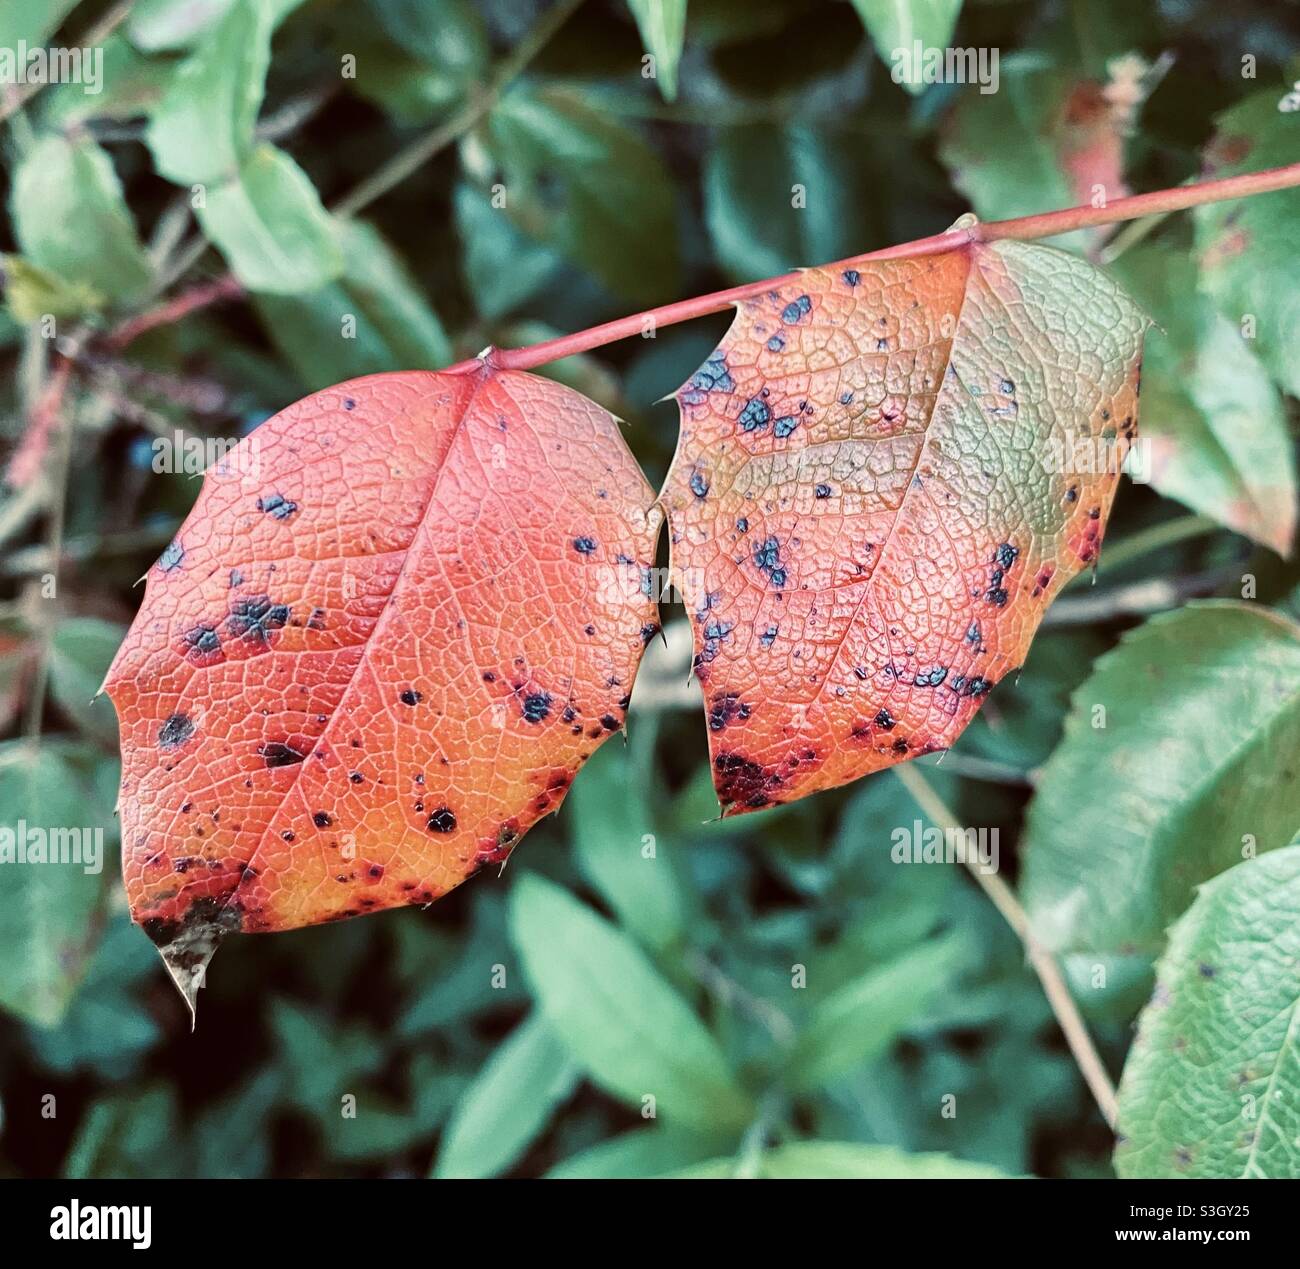 Vivid red leaves in the garden nature photography Stock Photo